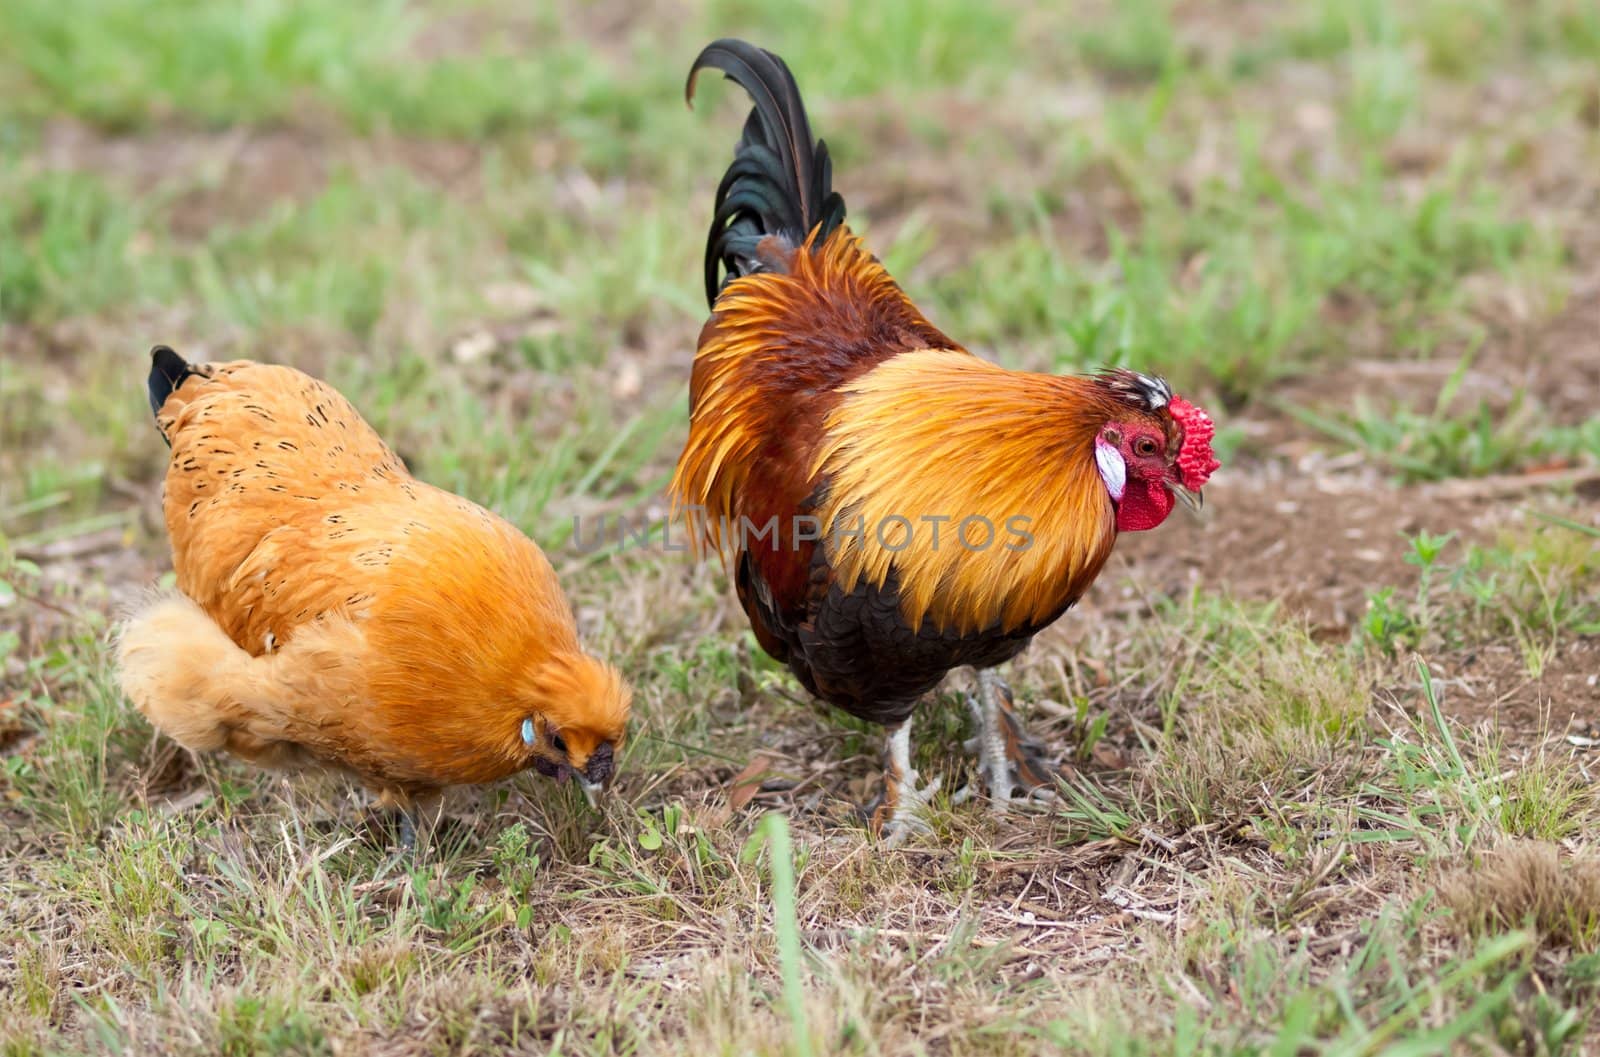 Pair of two Bantam chickens forage for food by sherj